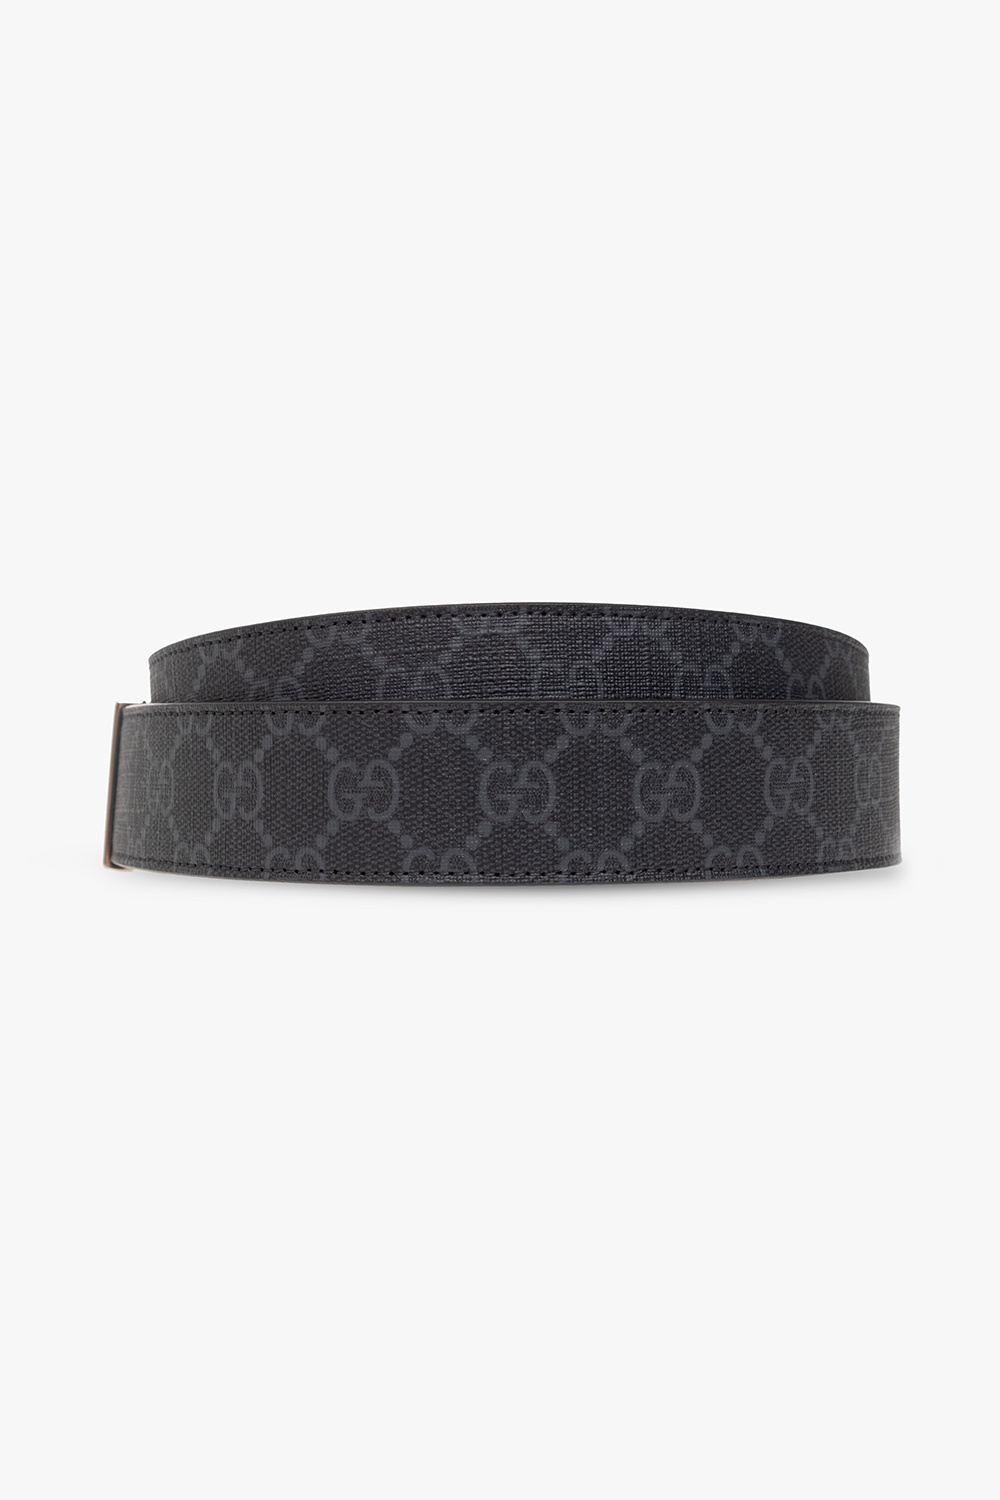 gucci PATTERNED Belt with logo